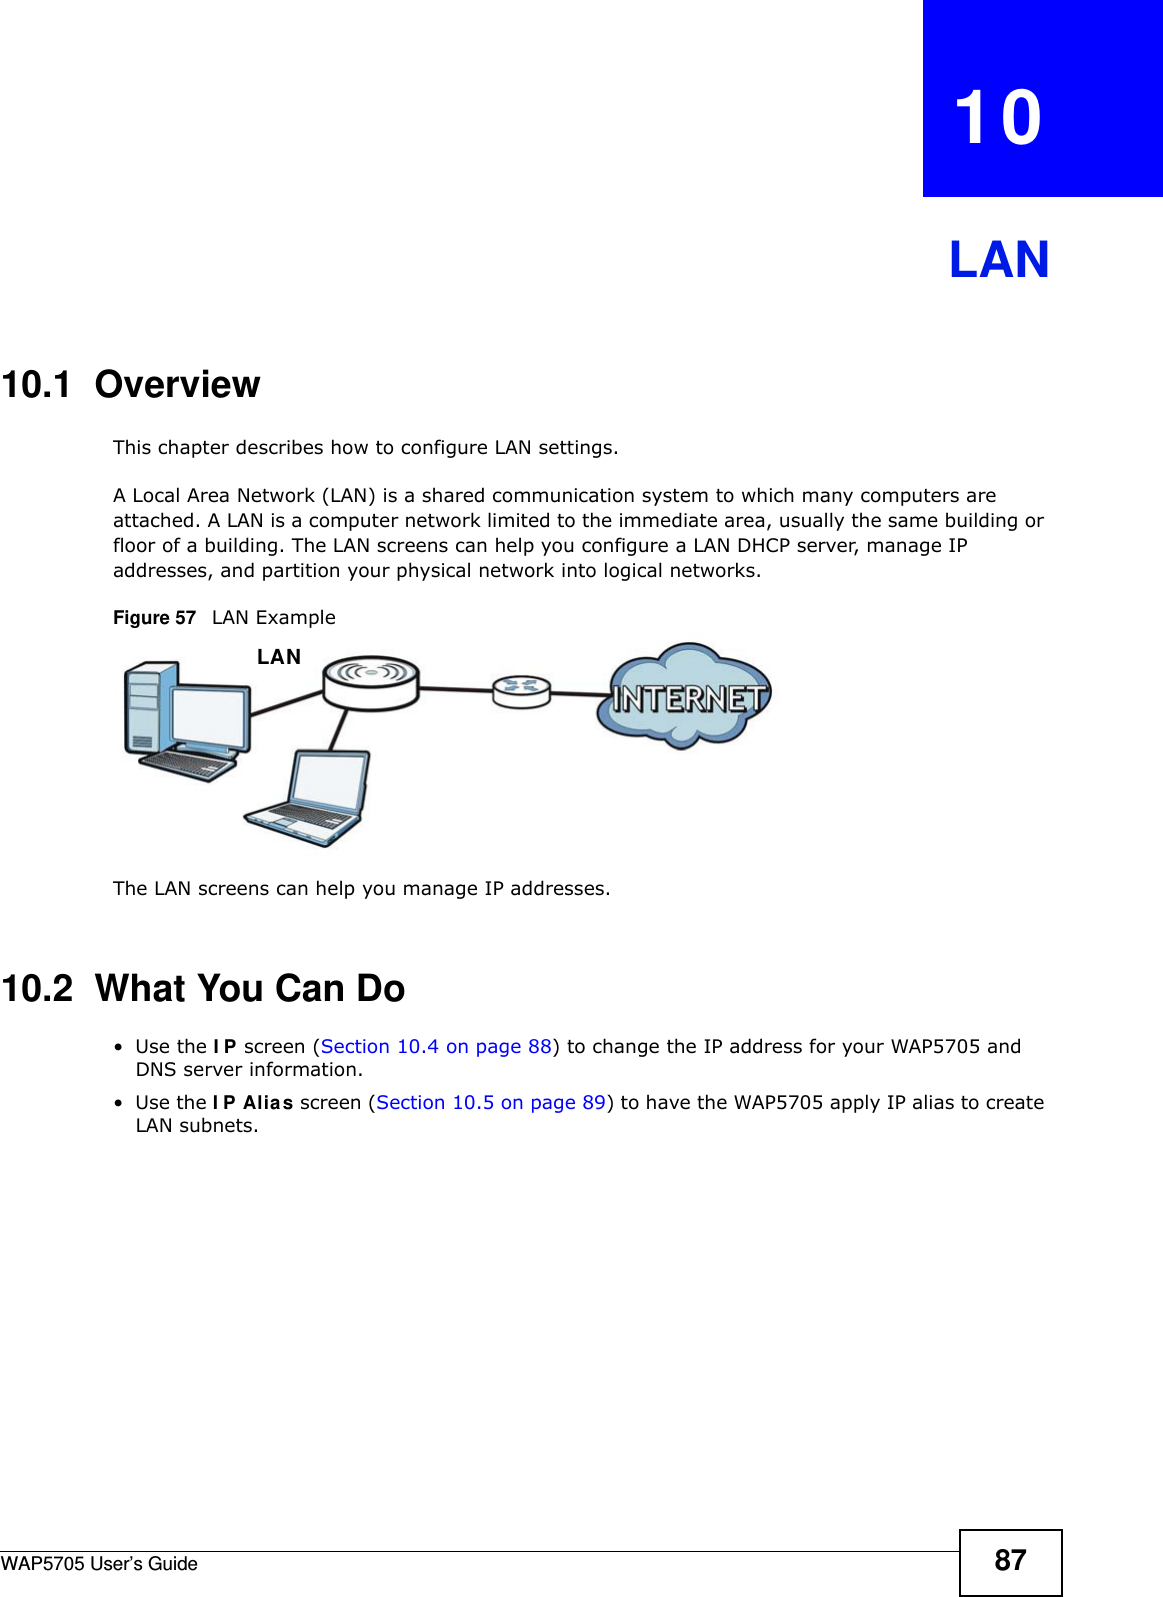 WAP5705 User’s Guide 87CHAPTER   10LAN10.1  OverviewThis chapter describes how to configure LAN settings.A Local Area Network (LAN) is a shared communication system to which many computers are attached. A LAN is a computer network limited to the immediate area, usually the same building or floor of a building. The LAN screens can help you configure a LAN DHCP server, manage IP addresses, and partition your physical network into logical networks.Figure 57   LAN ExampleThe LAN screens can help you manage IP addresses.10.2  What You Can Do•Use the I P screen (Section 10.4 on page 88) to change the IP address for your WAP5705 and DNS server information.•Use the I P Alia s screen (Section 10.5 on page 89) to have the WAP5705 apply IP alias to create LAN subnets.LAN